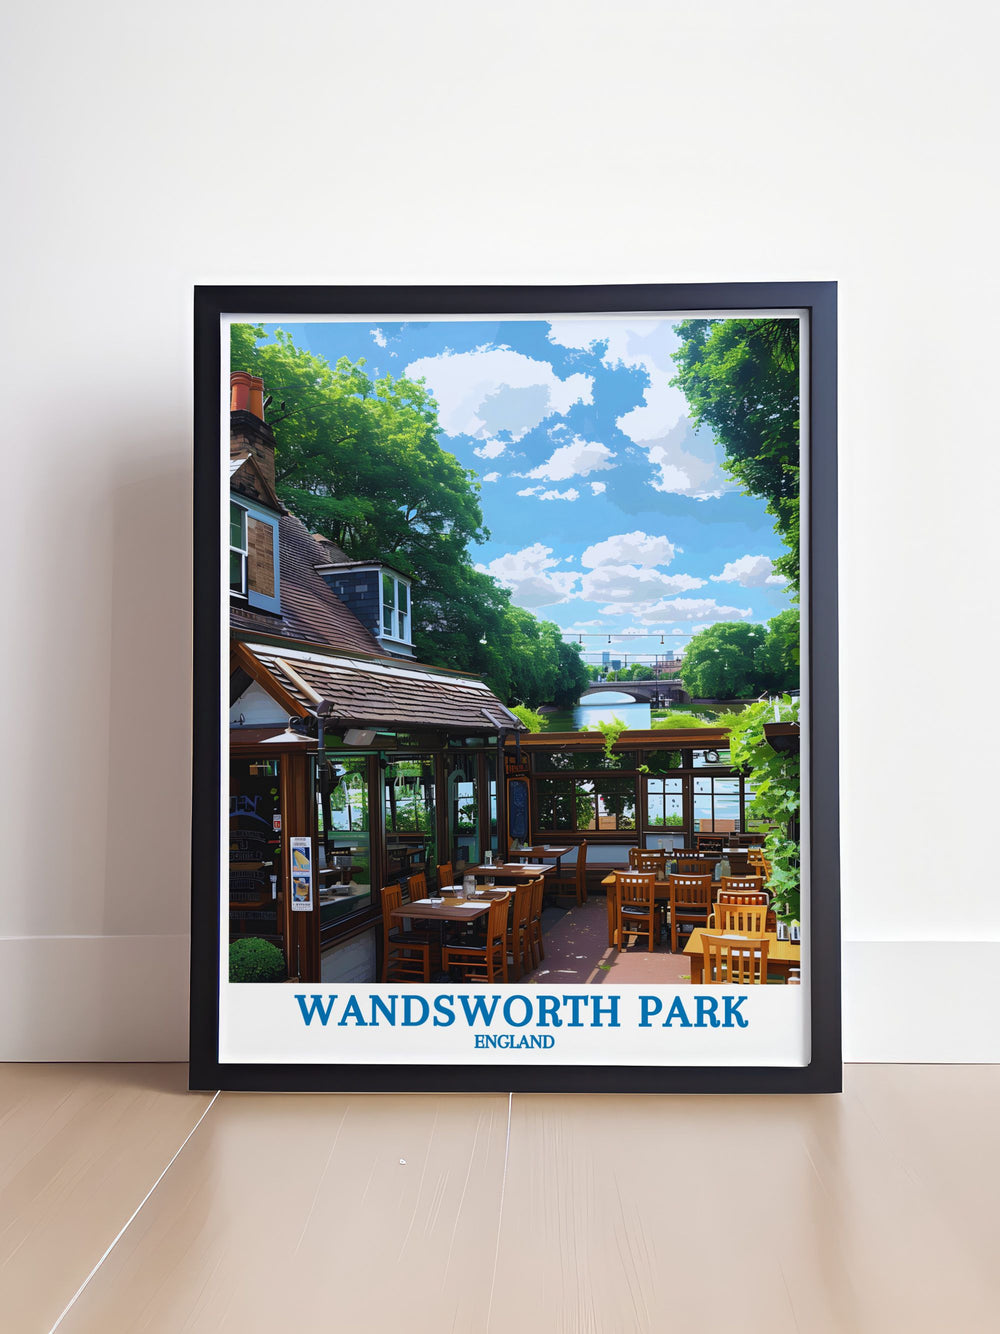 The peaceful vistas of Wandsworth Park, captured in this vintage style poster, evoke the charm and serenity of Londons historic green spaces. Ideal for history buffs and art lovers who appreciate the timeless elegance of the citys parks, this artwork brings a piece of Londons past into modern decor, blending old and new beautifully.